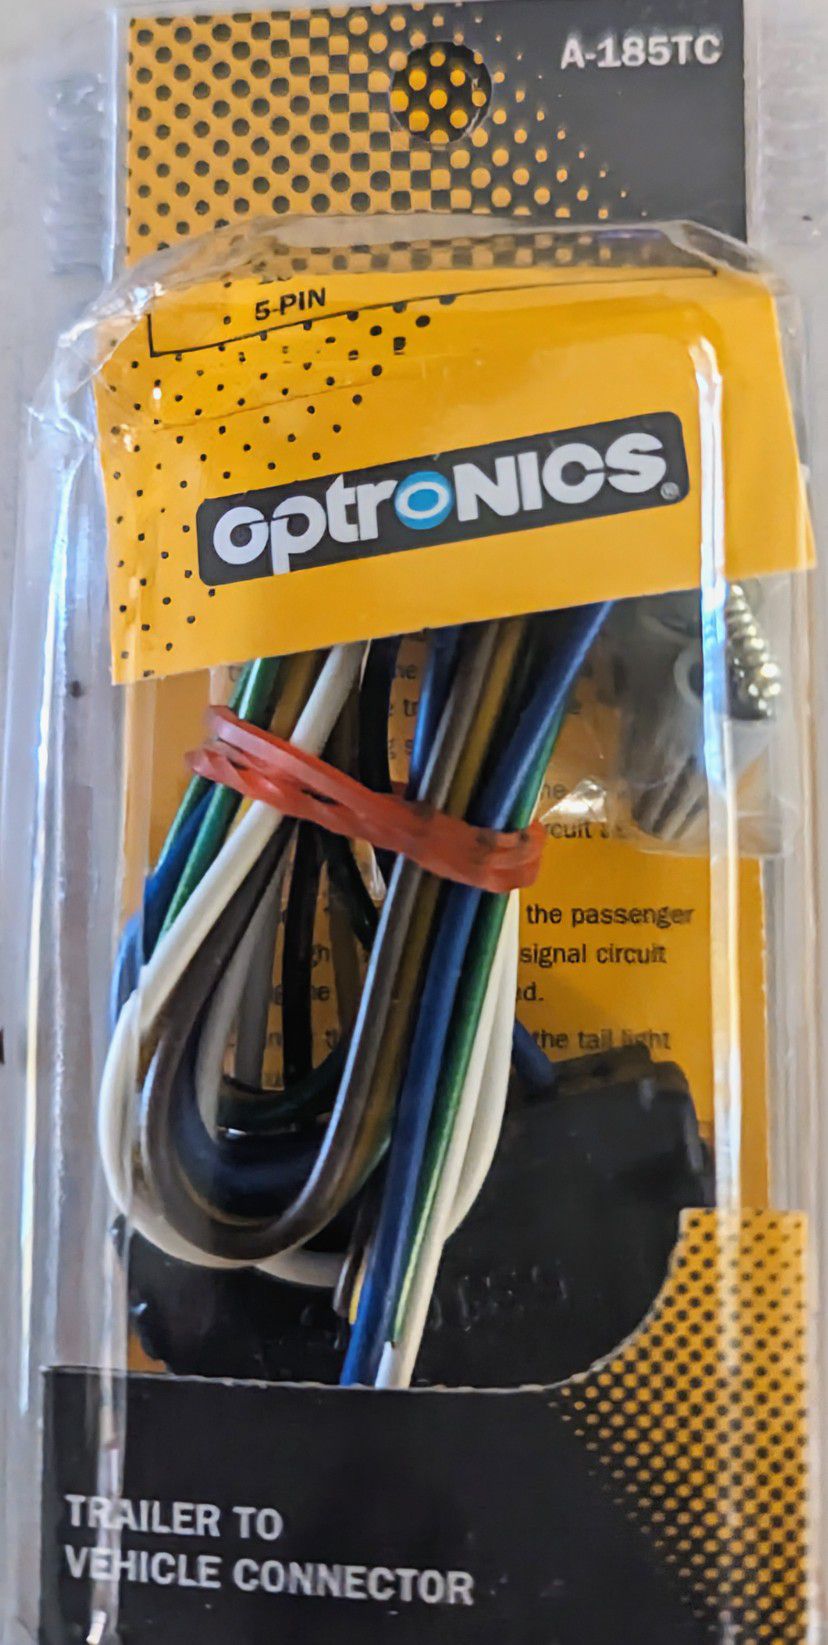 Optonics 5-wire Trailer to Vehicle Connector 